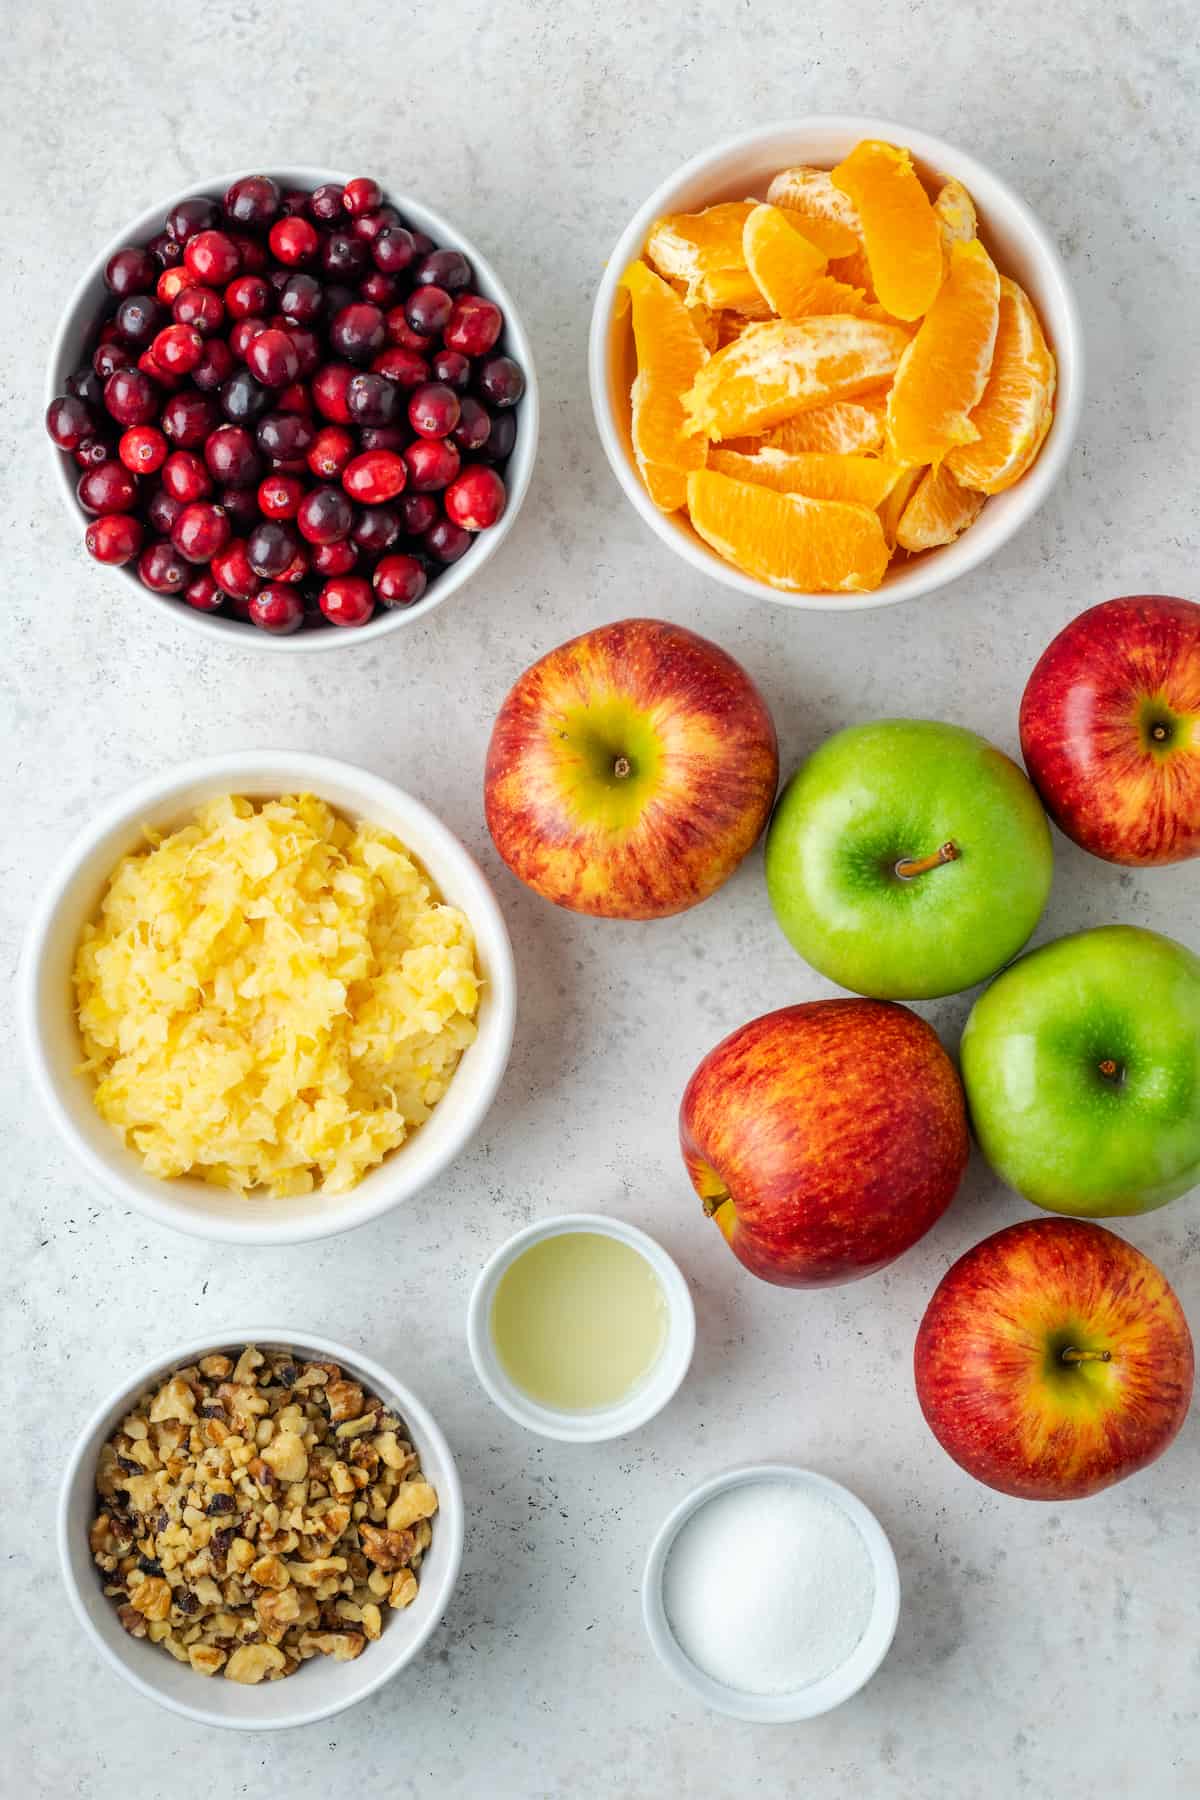 Apples, cranberries, oranges and other ingredients for a winter fruit salad laid out in separate bowls on a counter.